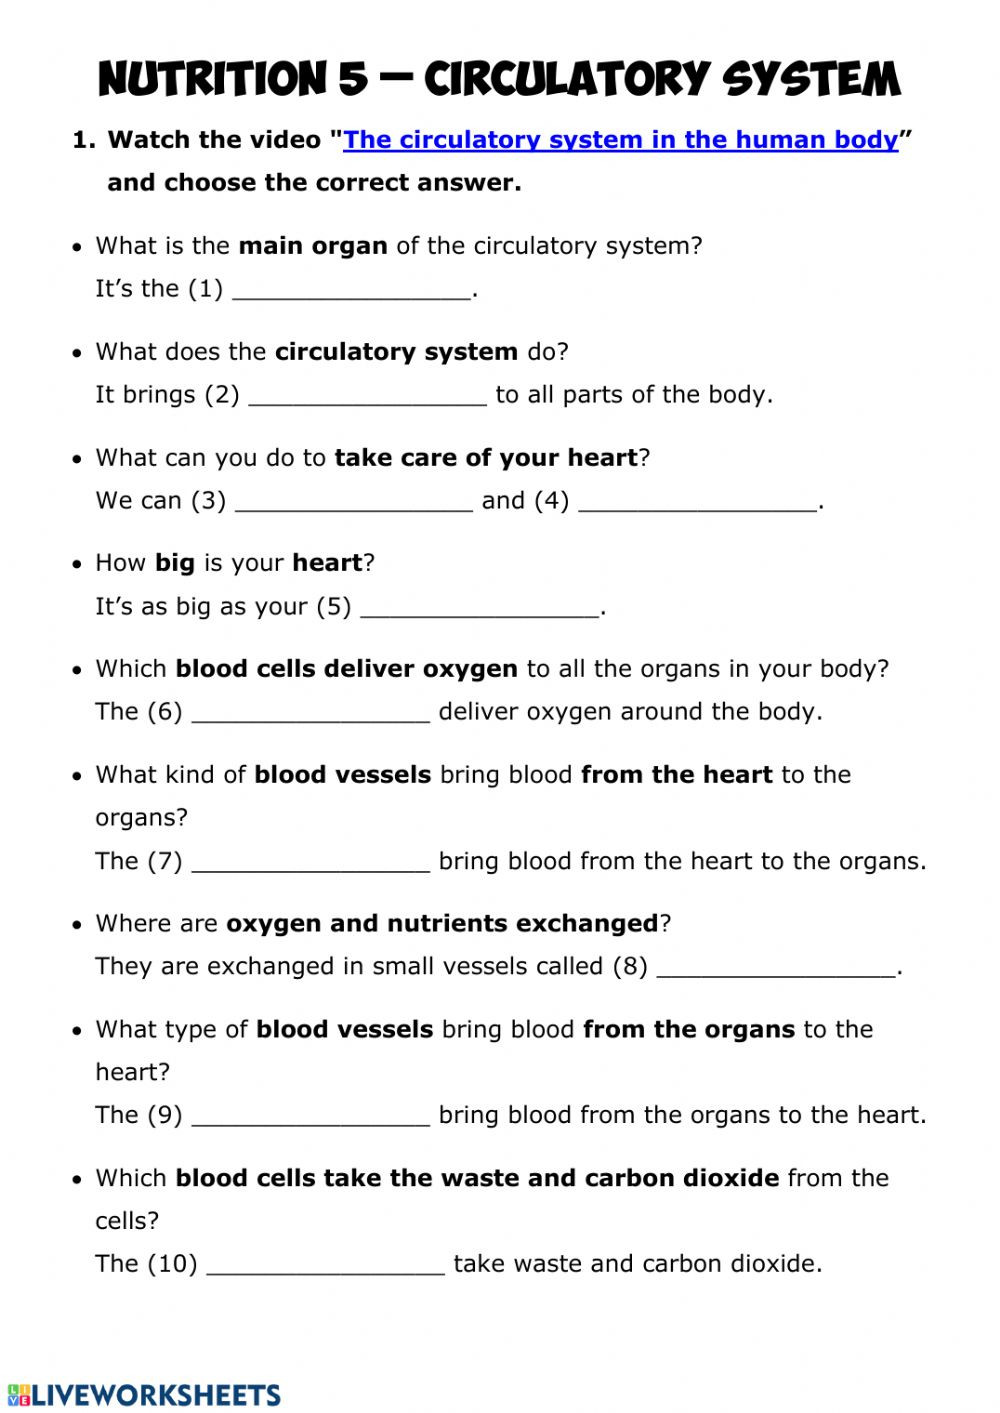 The Circulatory System Worksheet Nutrition 5 Circulatory System Circulatory System Worksheet